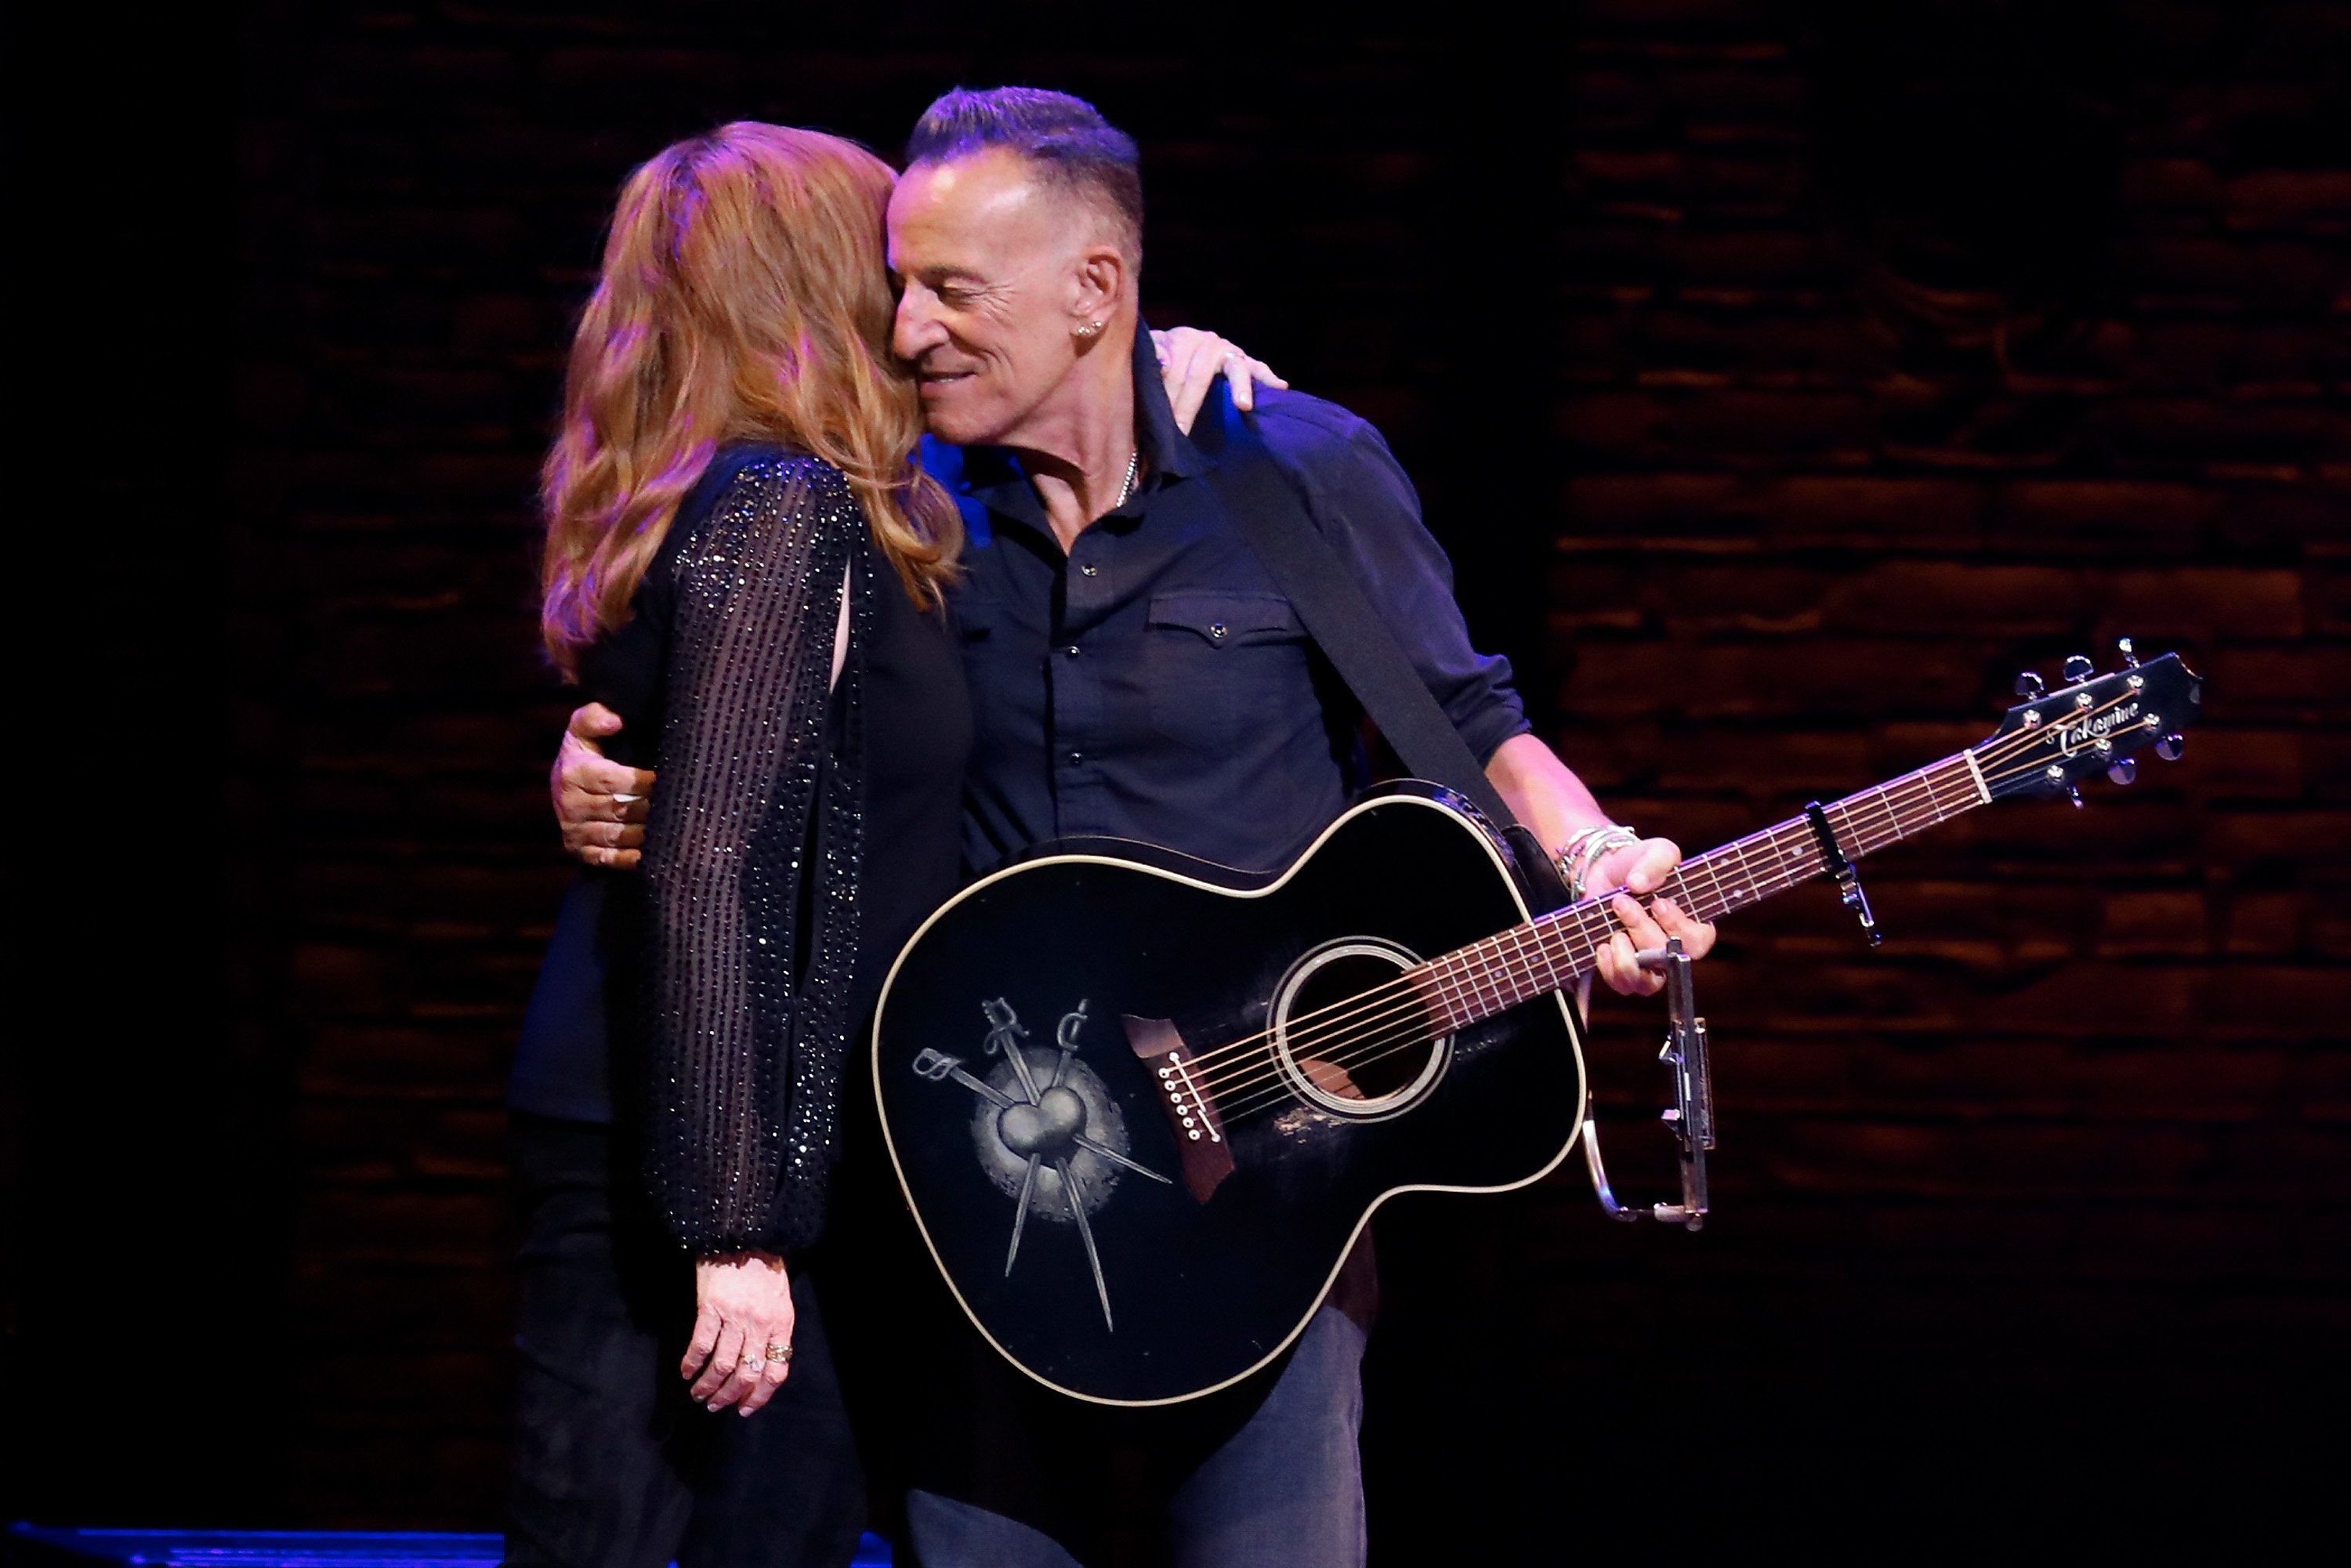 Bruce Springsteen and Patti Scialfa take a bow during reopening night of "Springsteen on Broadway" for a full-capacity, vaccinated audience at St. James Theatre on June 26, 2021 in New York City. | Source: Getty Images